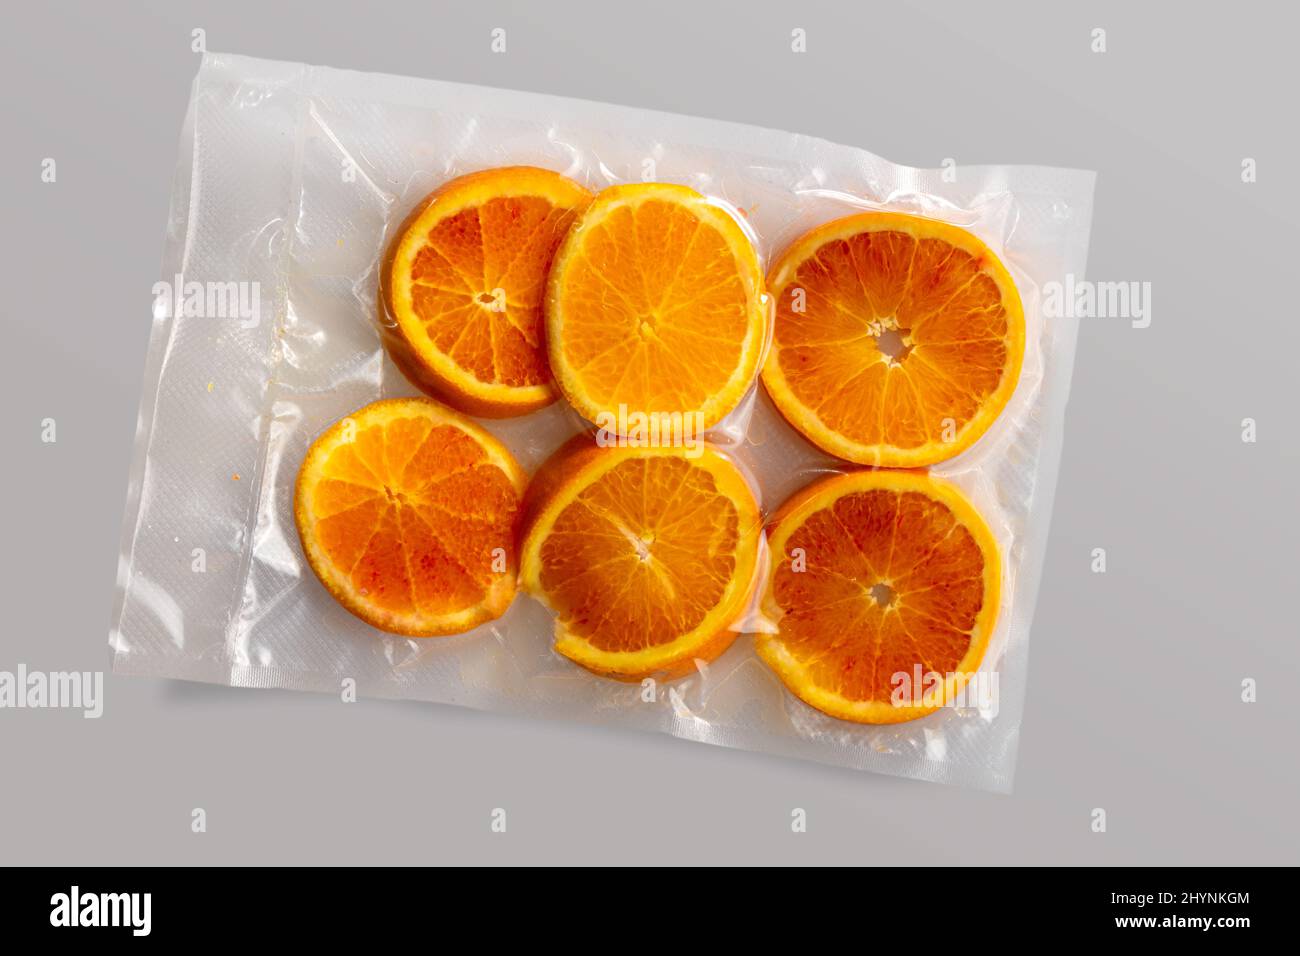 Slices of oranges fruit in vacuum packed sealed for sous vide cooking isolated on Grey background in top view Stock Photo